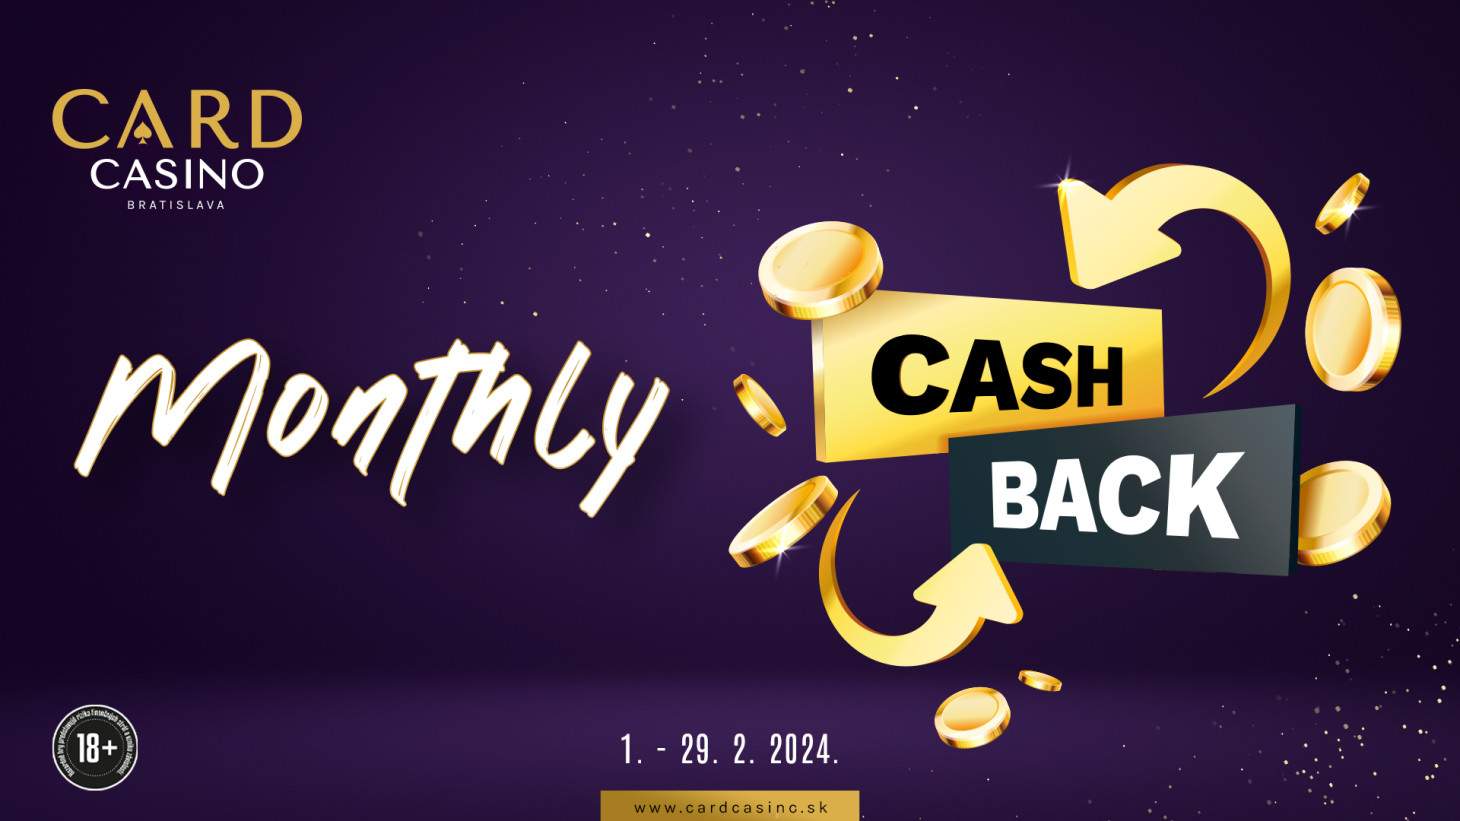 Play Cash Game in CARD with Cashback of the Month.